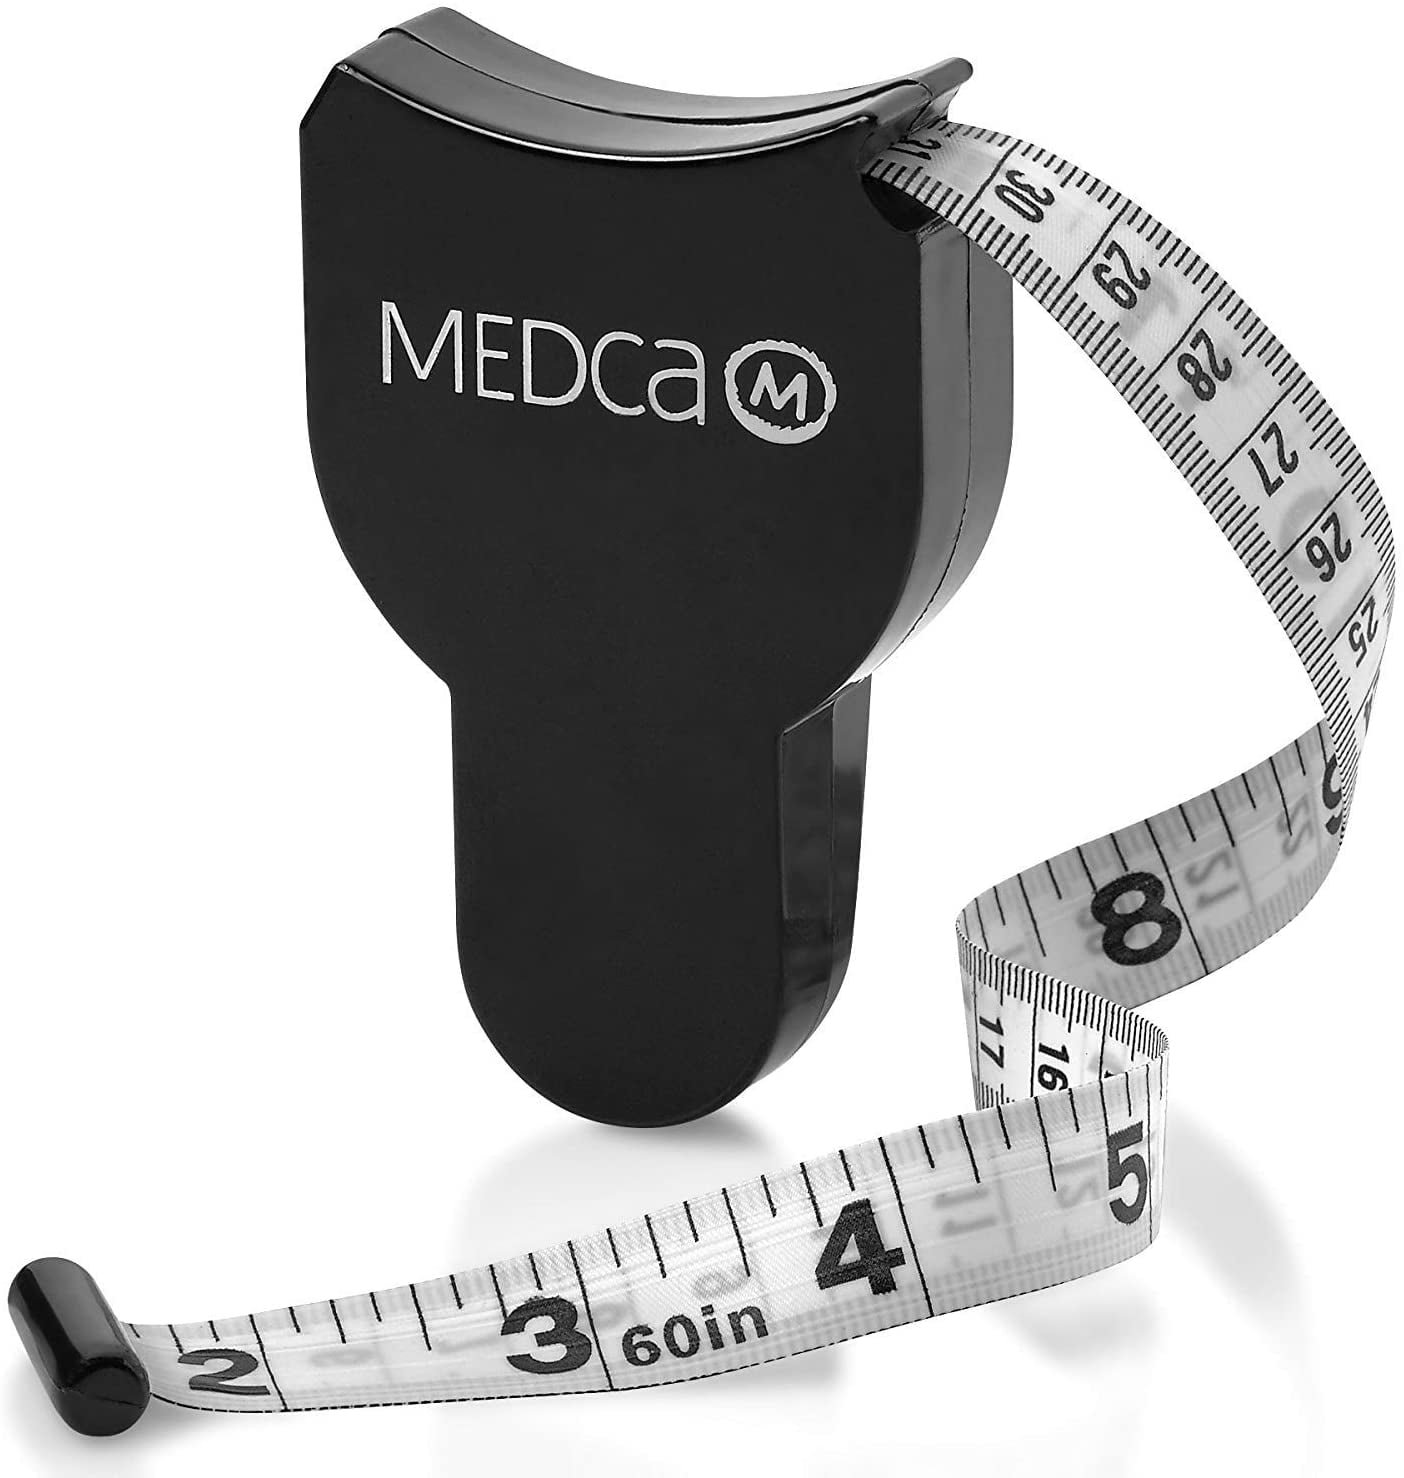 Body Fat Caliper and Measuring Tape for Body - Skinfold Calipers and Body  Fat Tape Measure Tool for Accurately Measuring BMI Skin Fold Fitness and  Weight-Loss - Upgraded New Design (Black) 